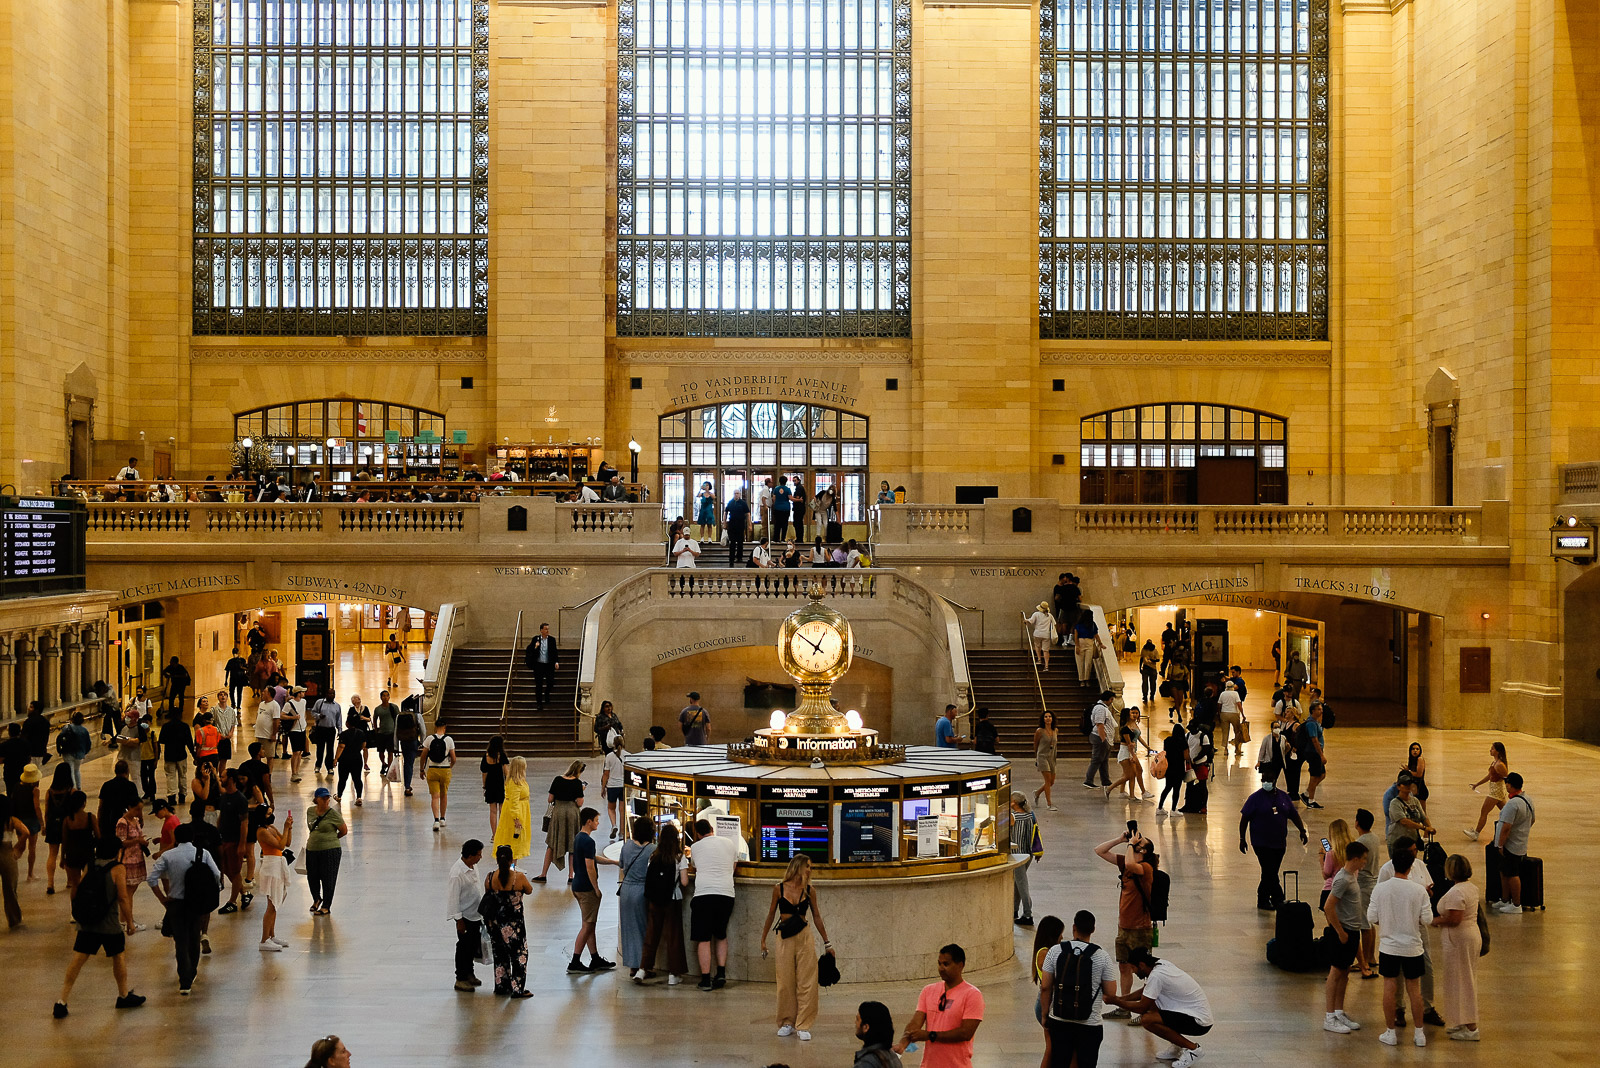 NYC Secrets of Grand Central Walking Tour 2023 - New York City